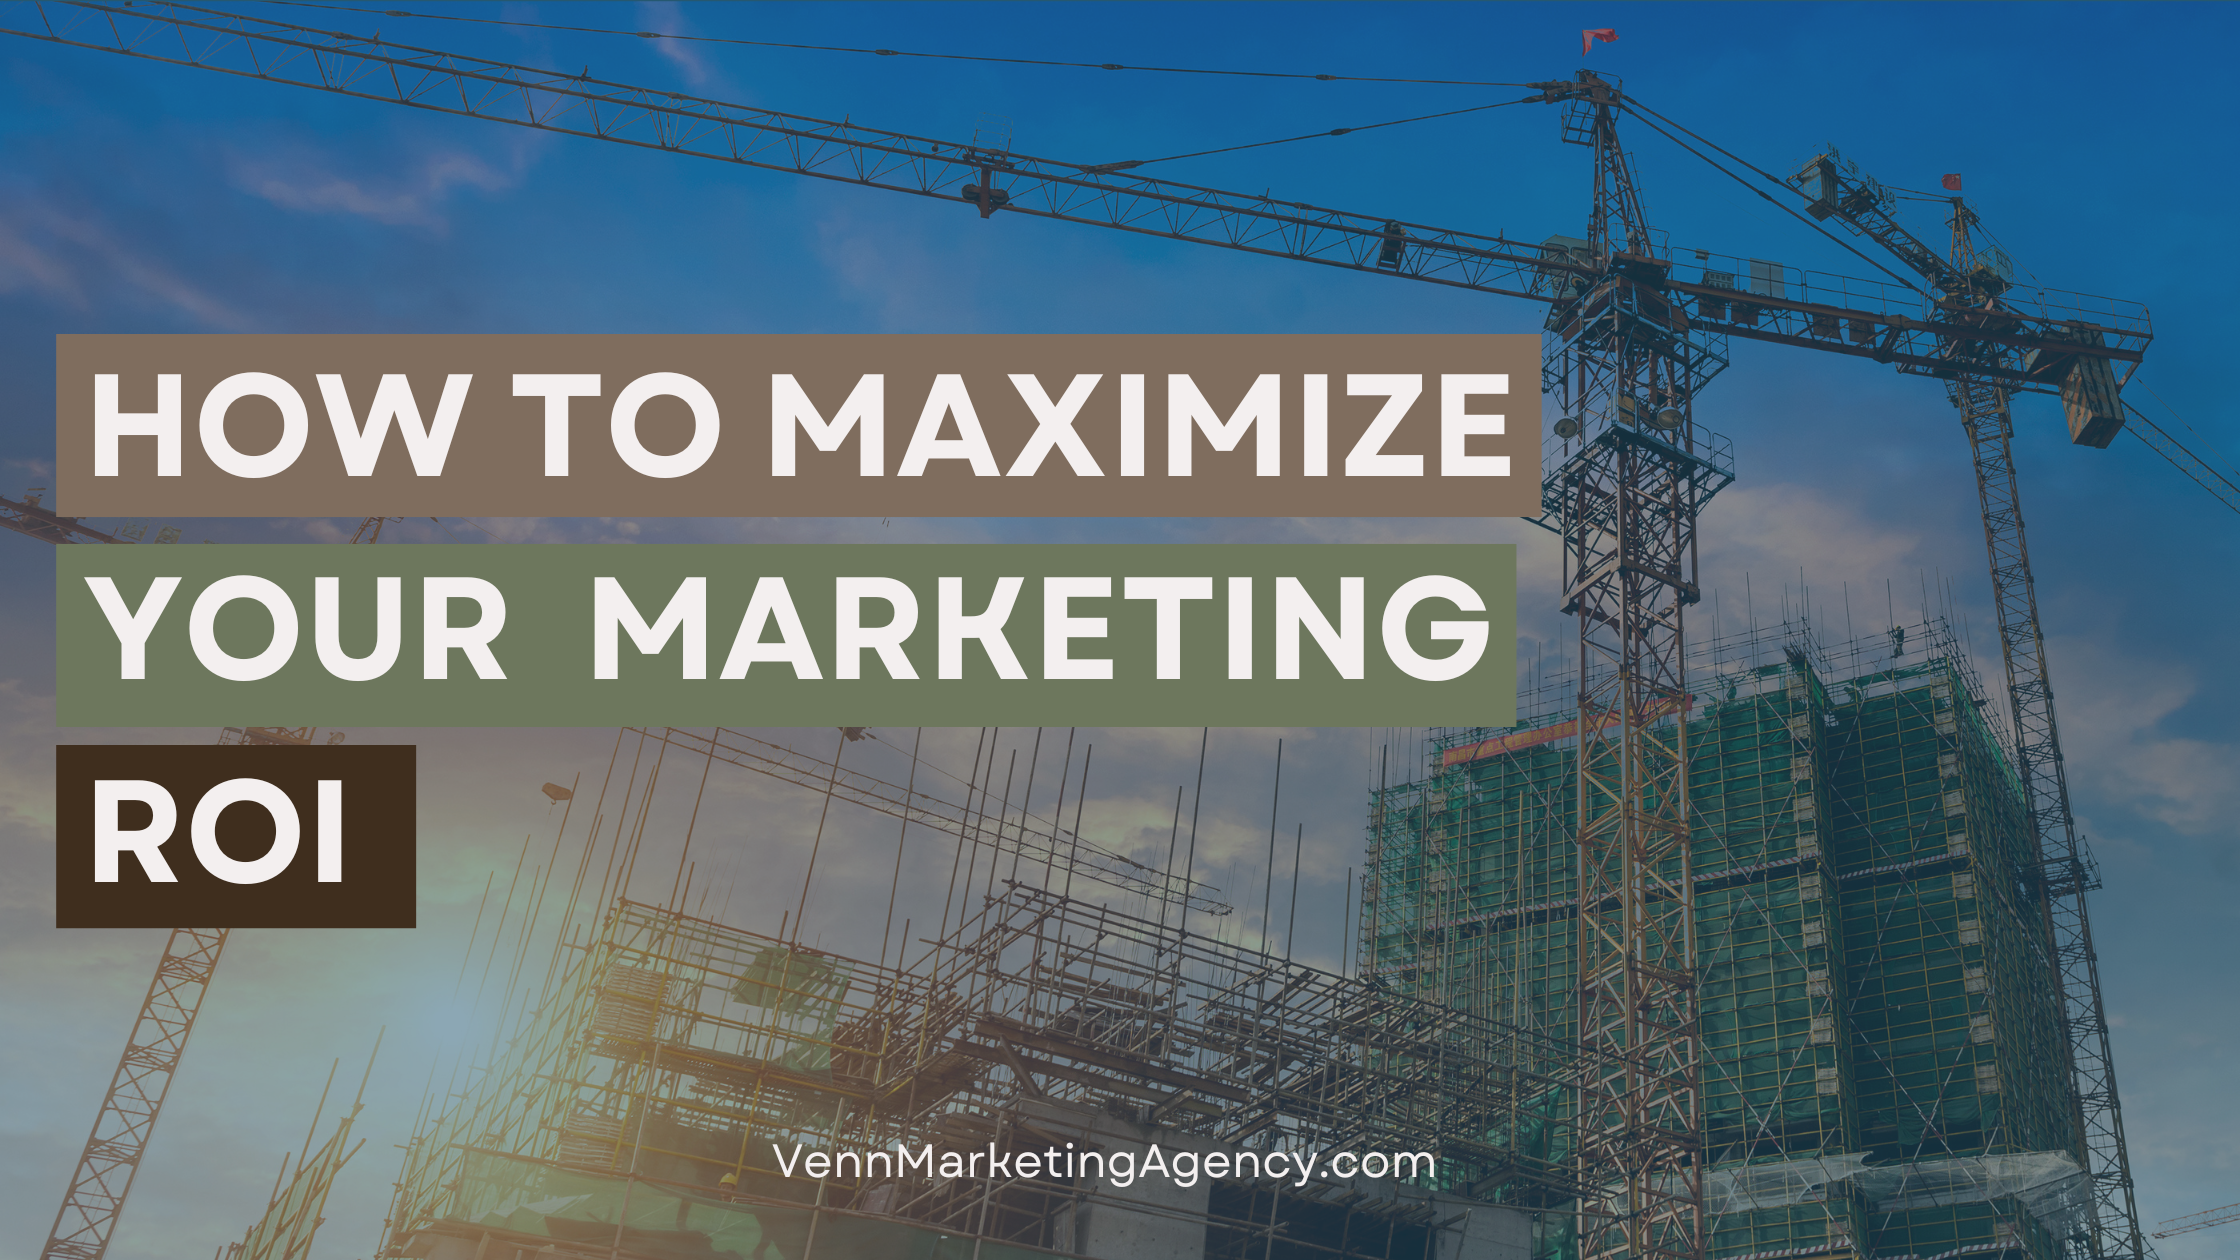 Maximize your CRE Marketing with Venn